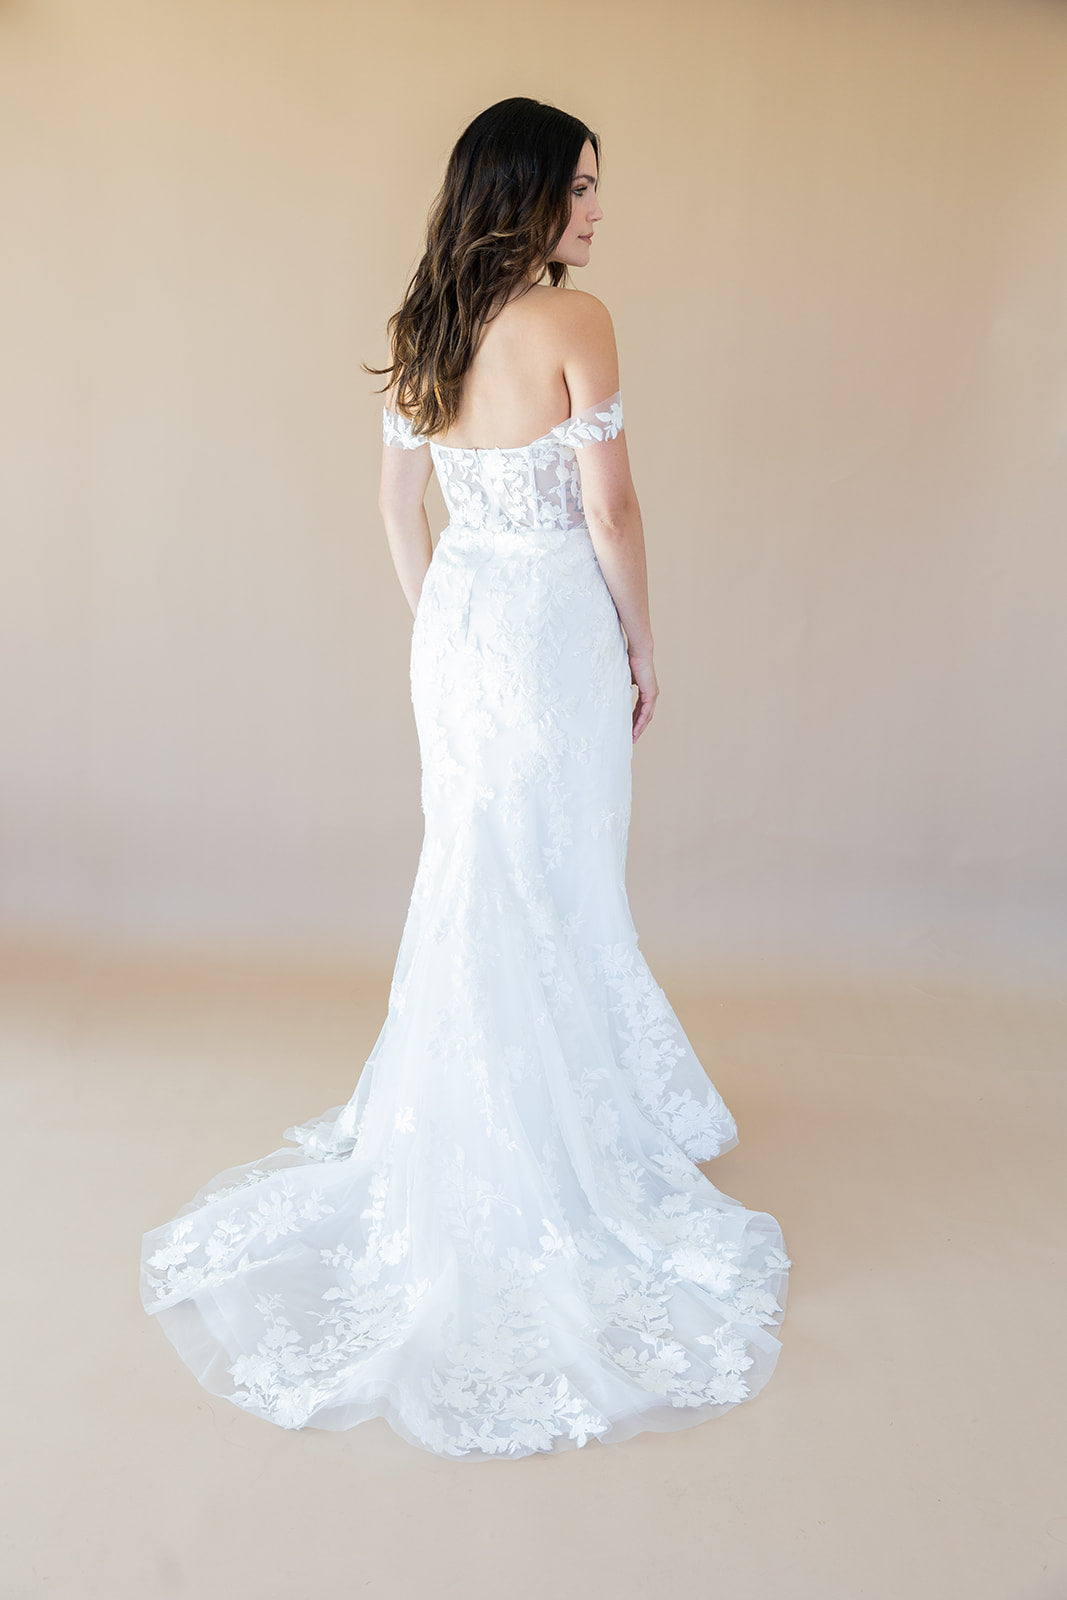 The Alina Gown